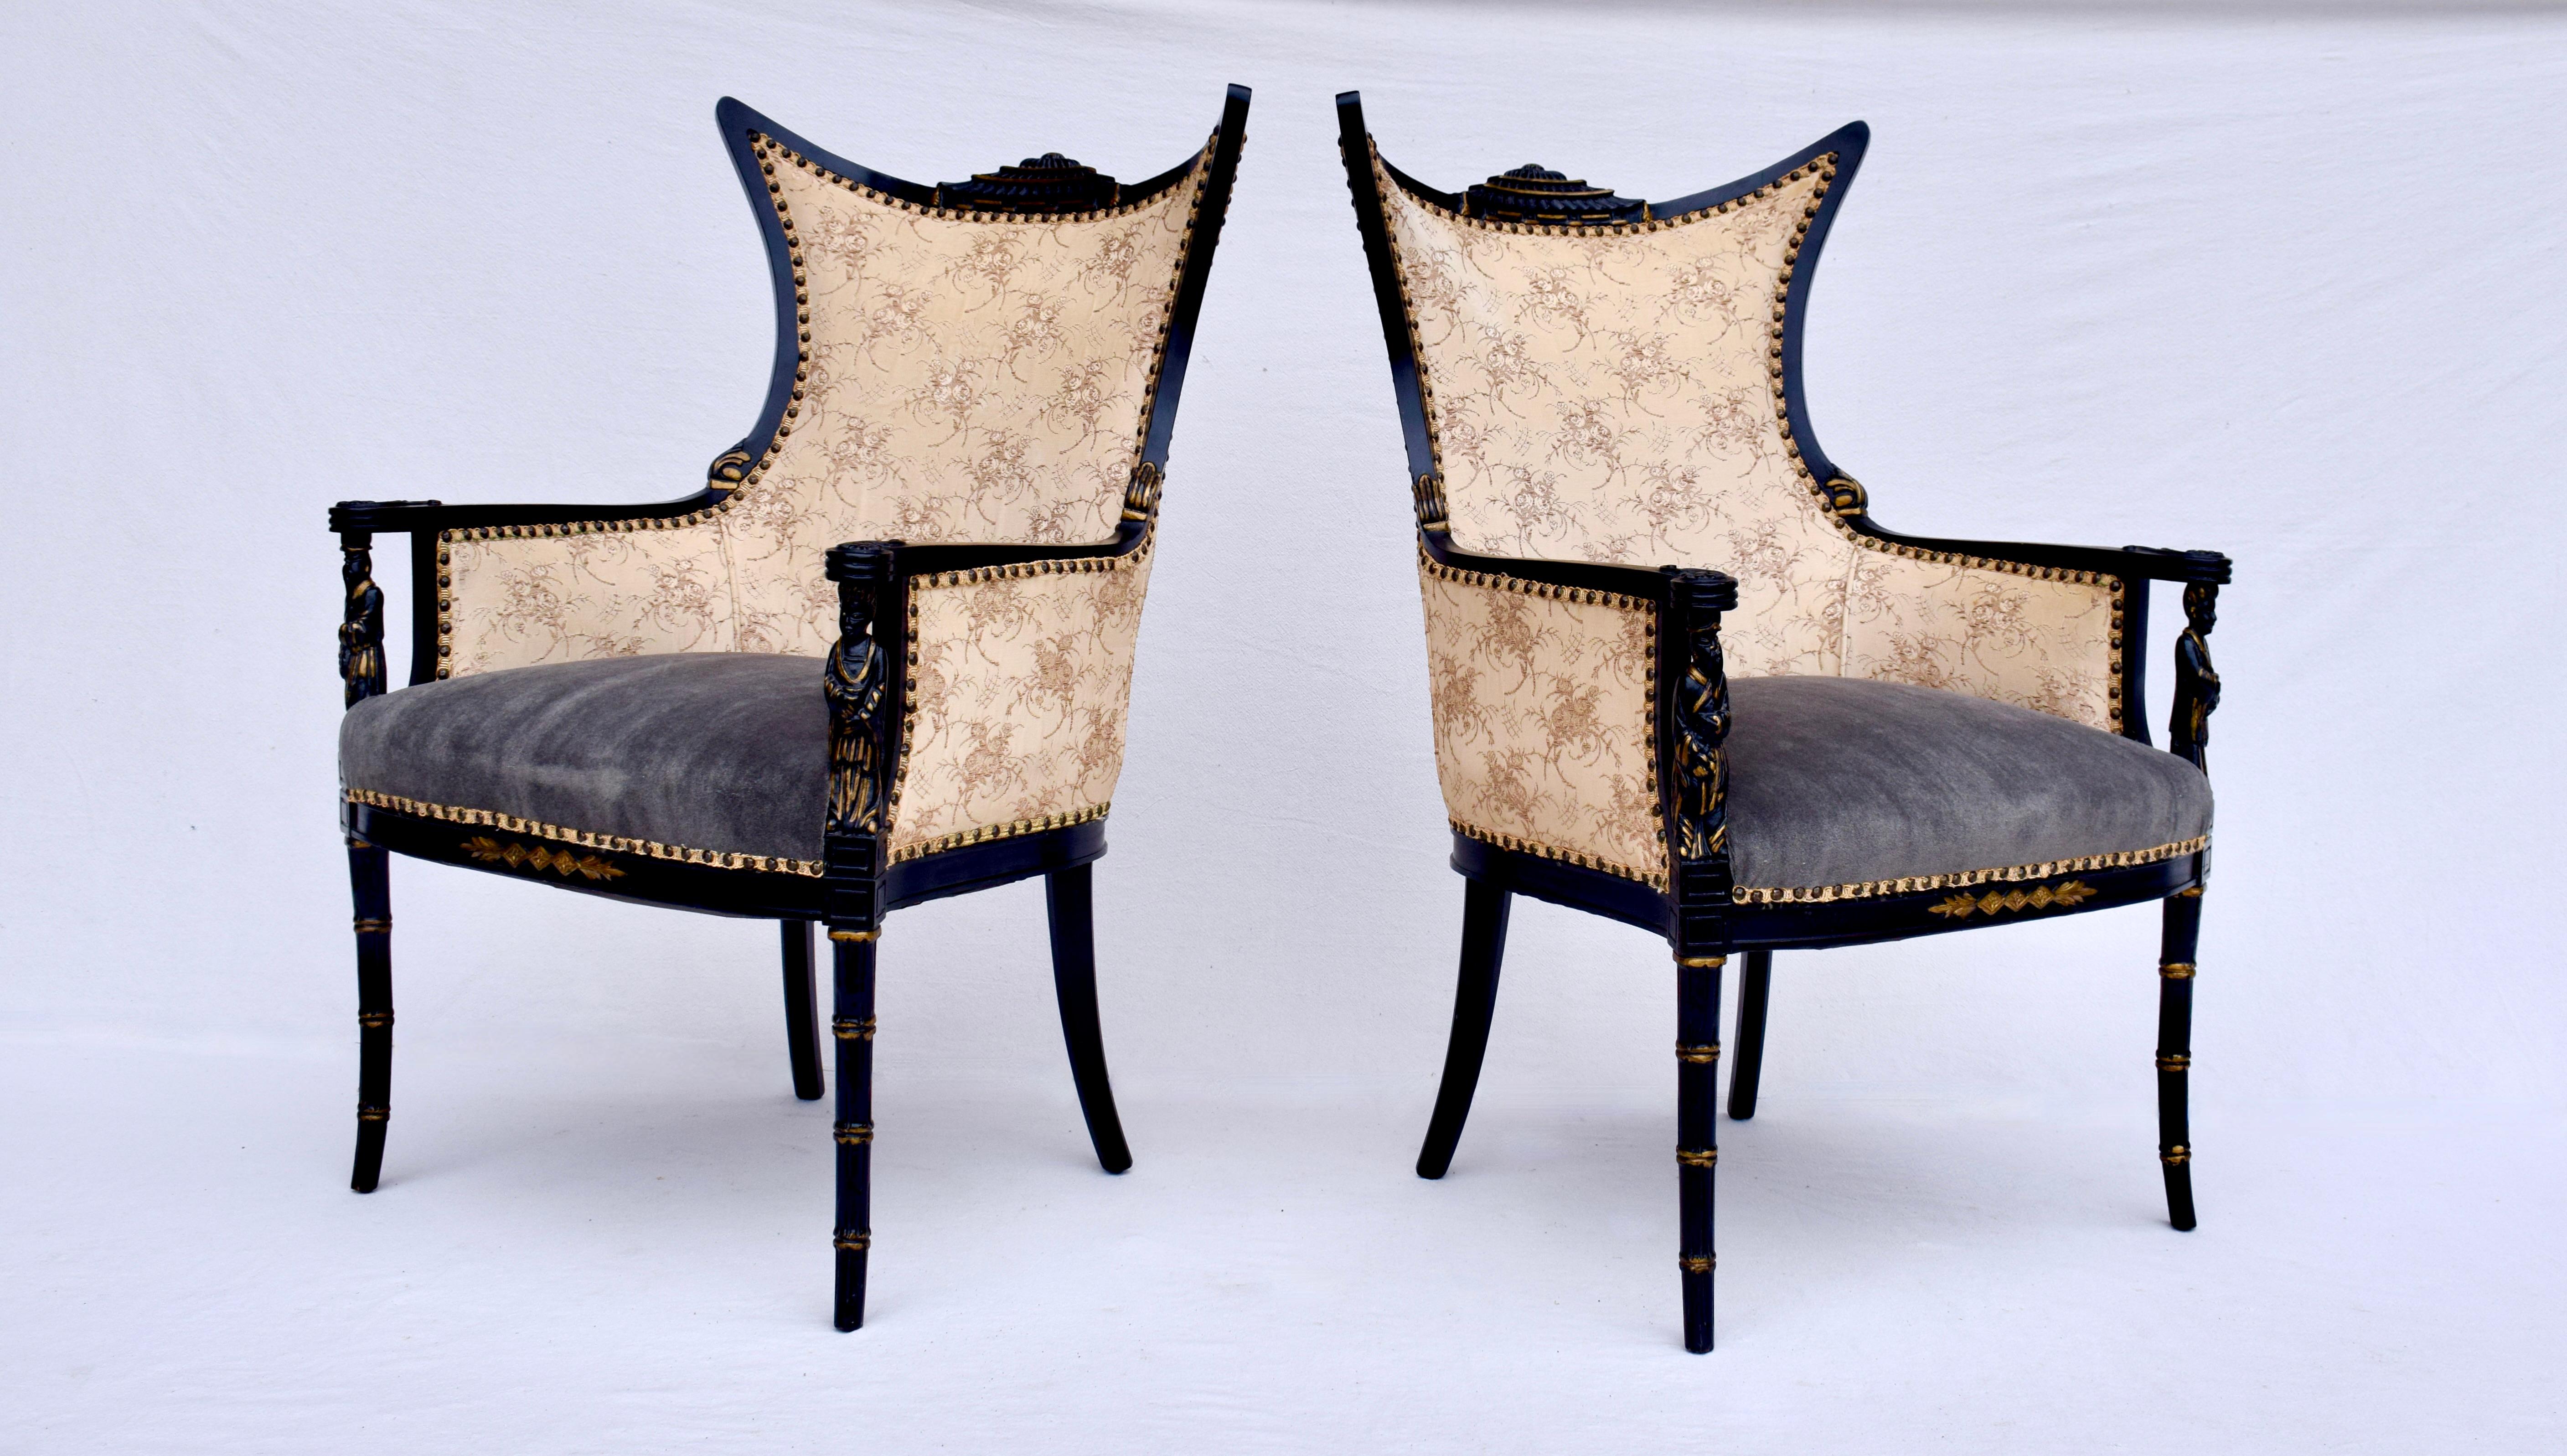 A striking pair of Hollywood Regency Chinoiserie armchairs with all original ebonized wood frames, carved figural arm rests, pagoda shaped crests on slightly splayed faux bamboo legs. Original Brocade upholstery is in beautifully maintained